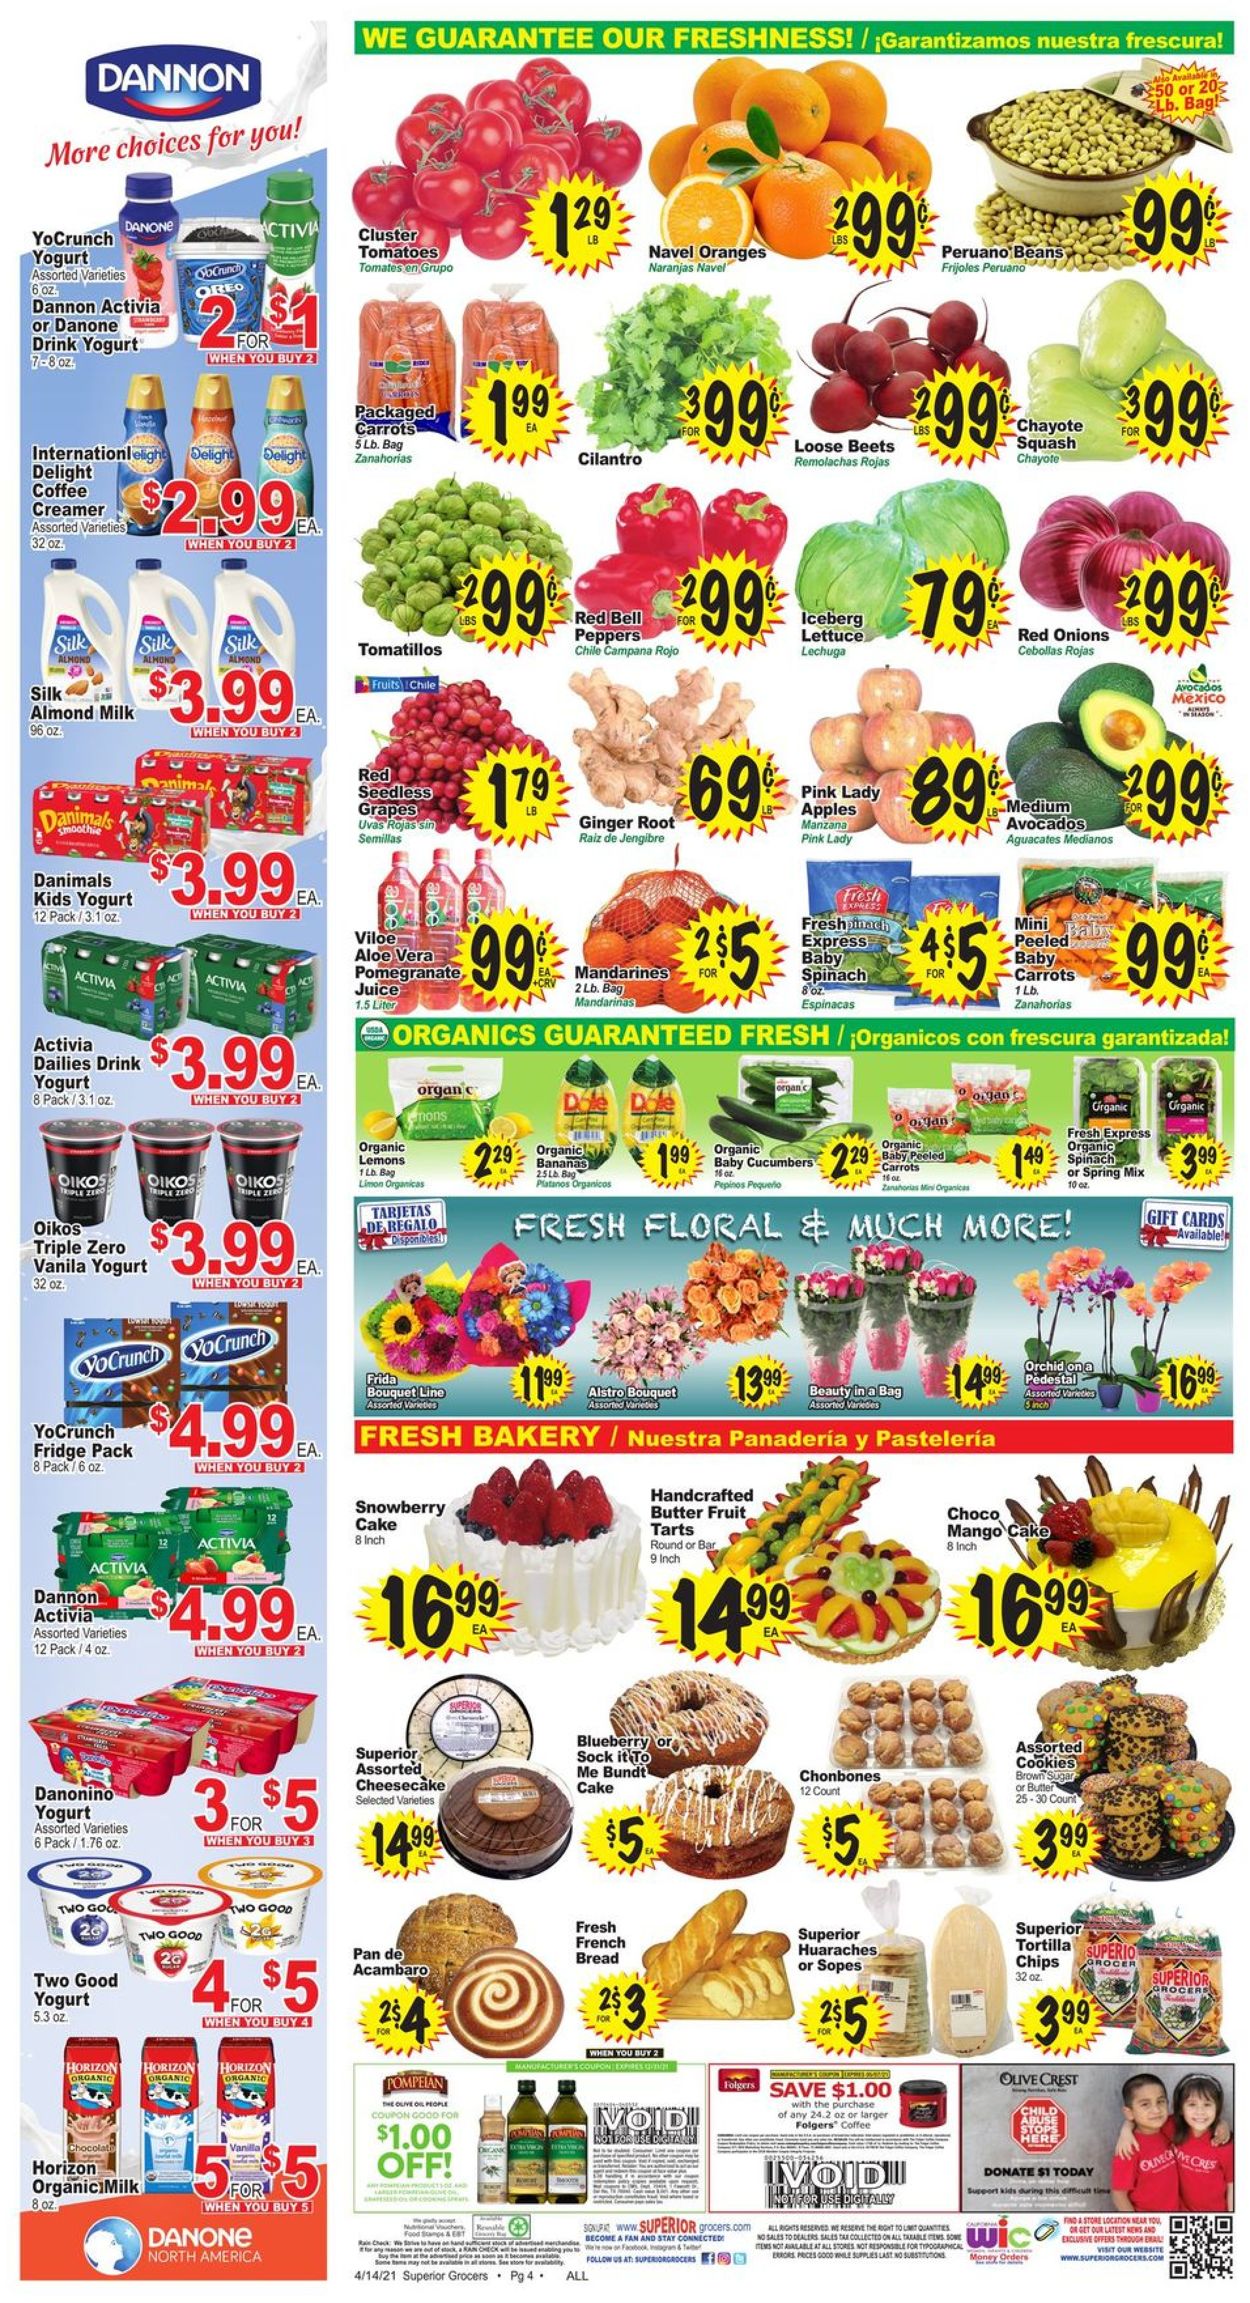 Catalogue Superior Grocers from 04/14/2021